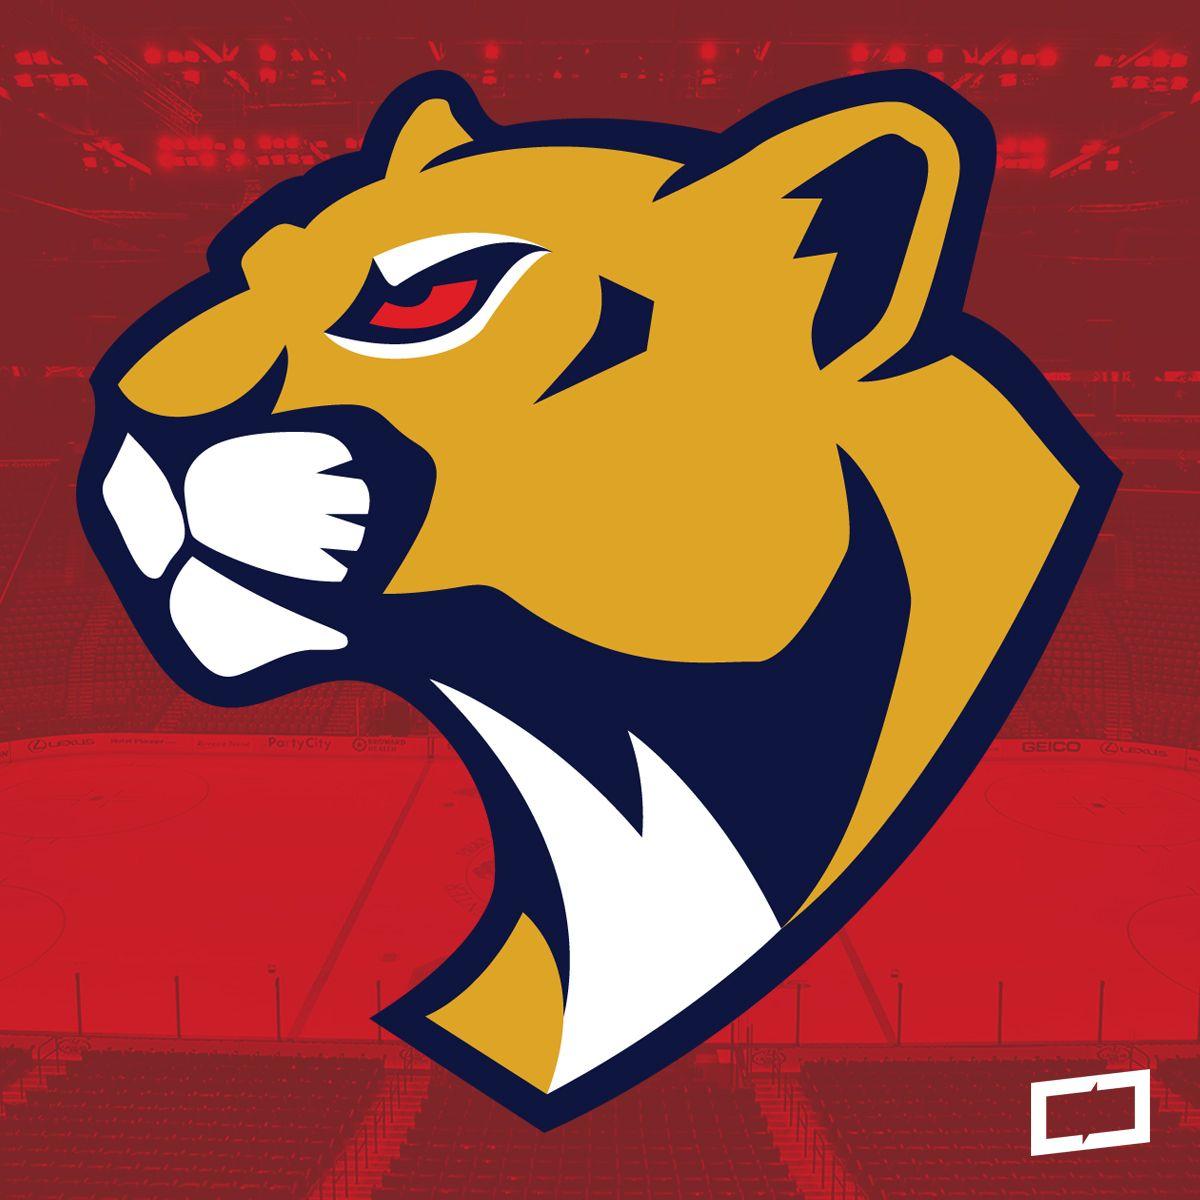 Yellow Panther Logo - I simplified (and slightly redesigned) the rumored Panthers logo